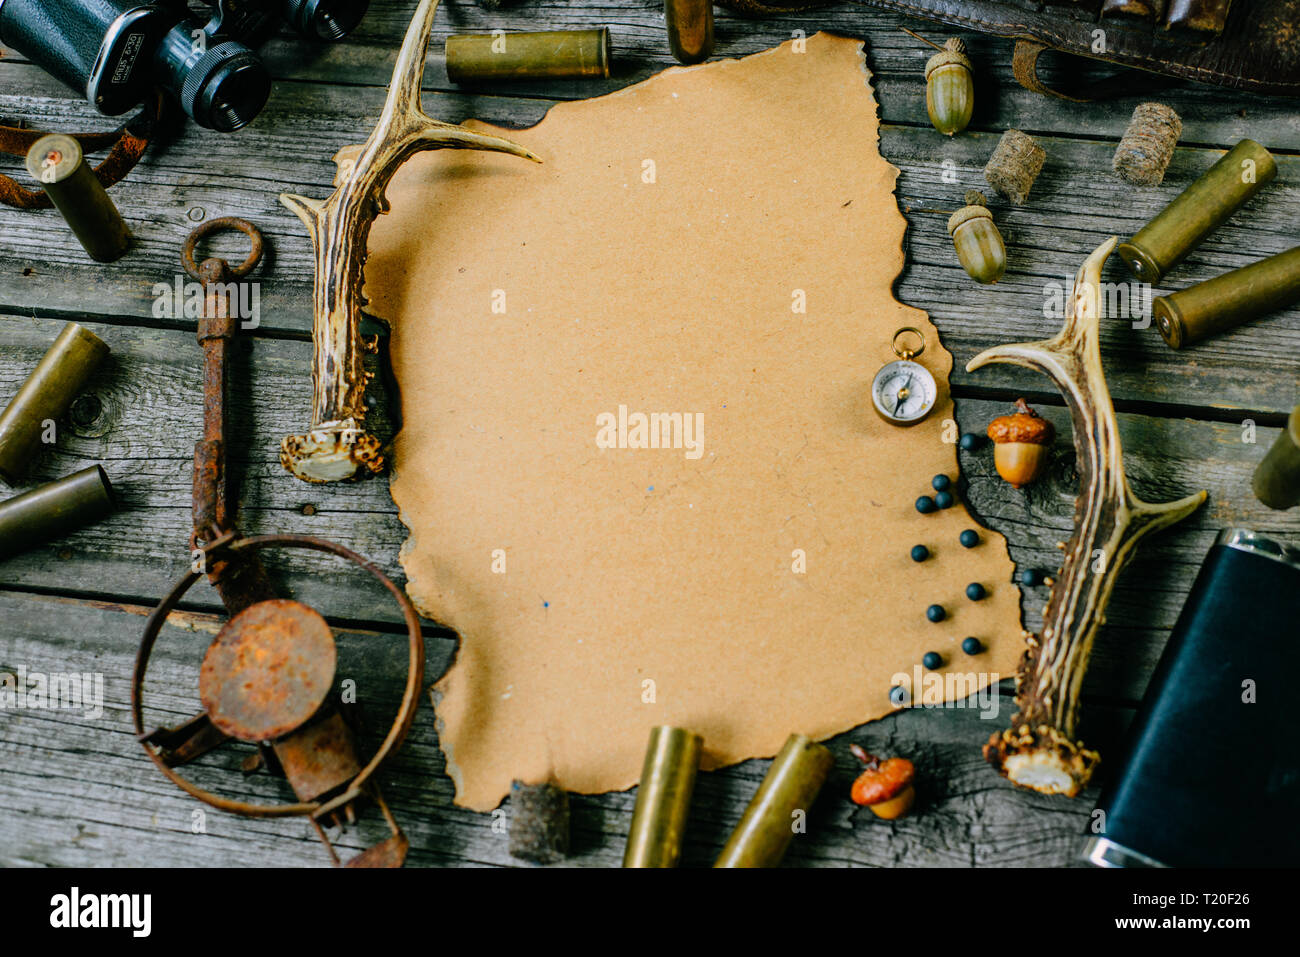 Paper for information with horn, trap and cartridges beside on old wooden background. Hunting equipment on vintage board. Stock Photo